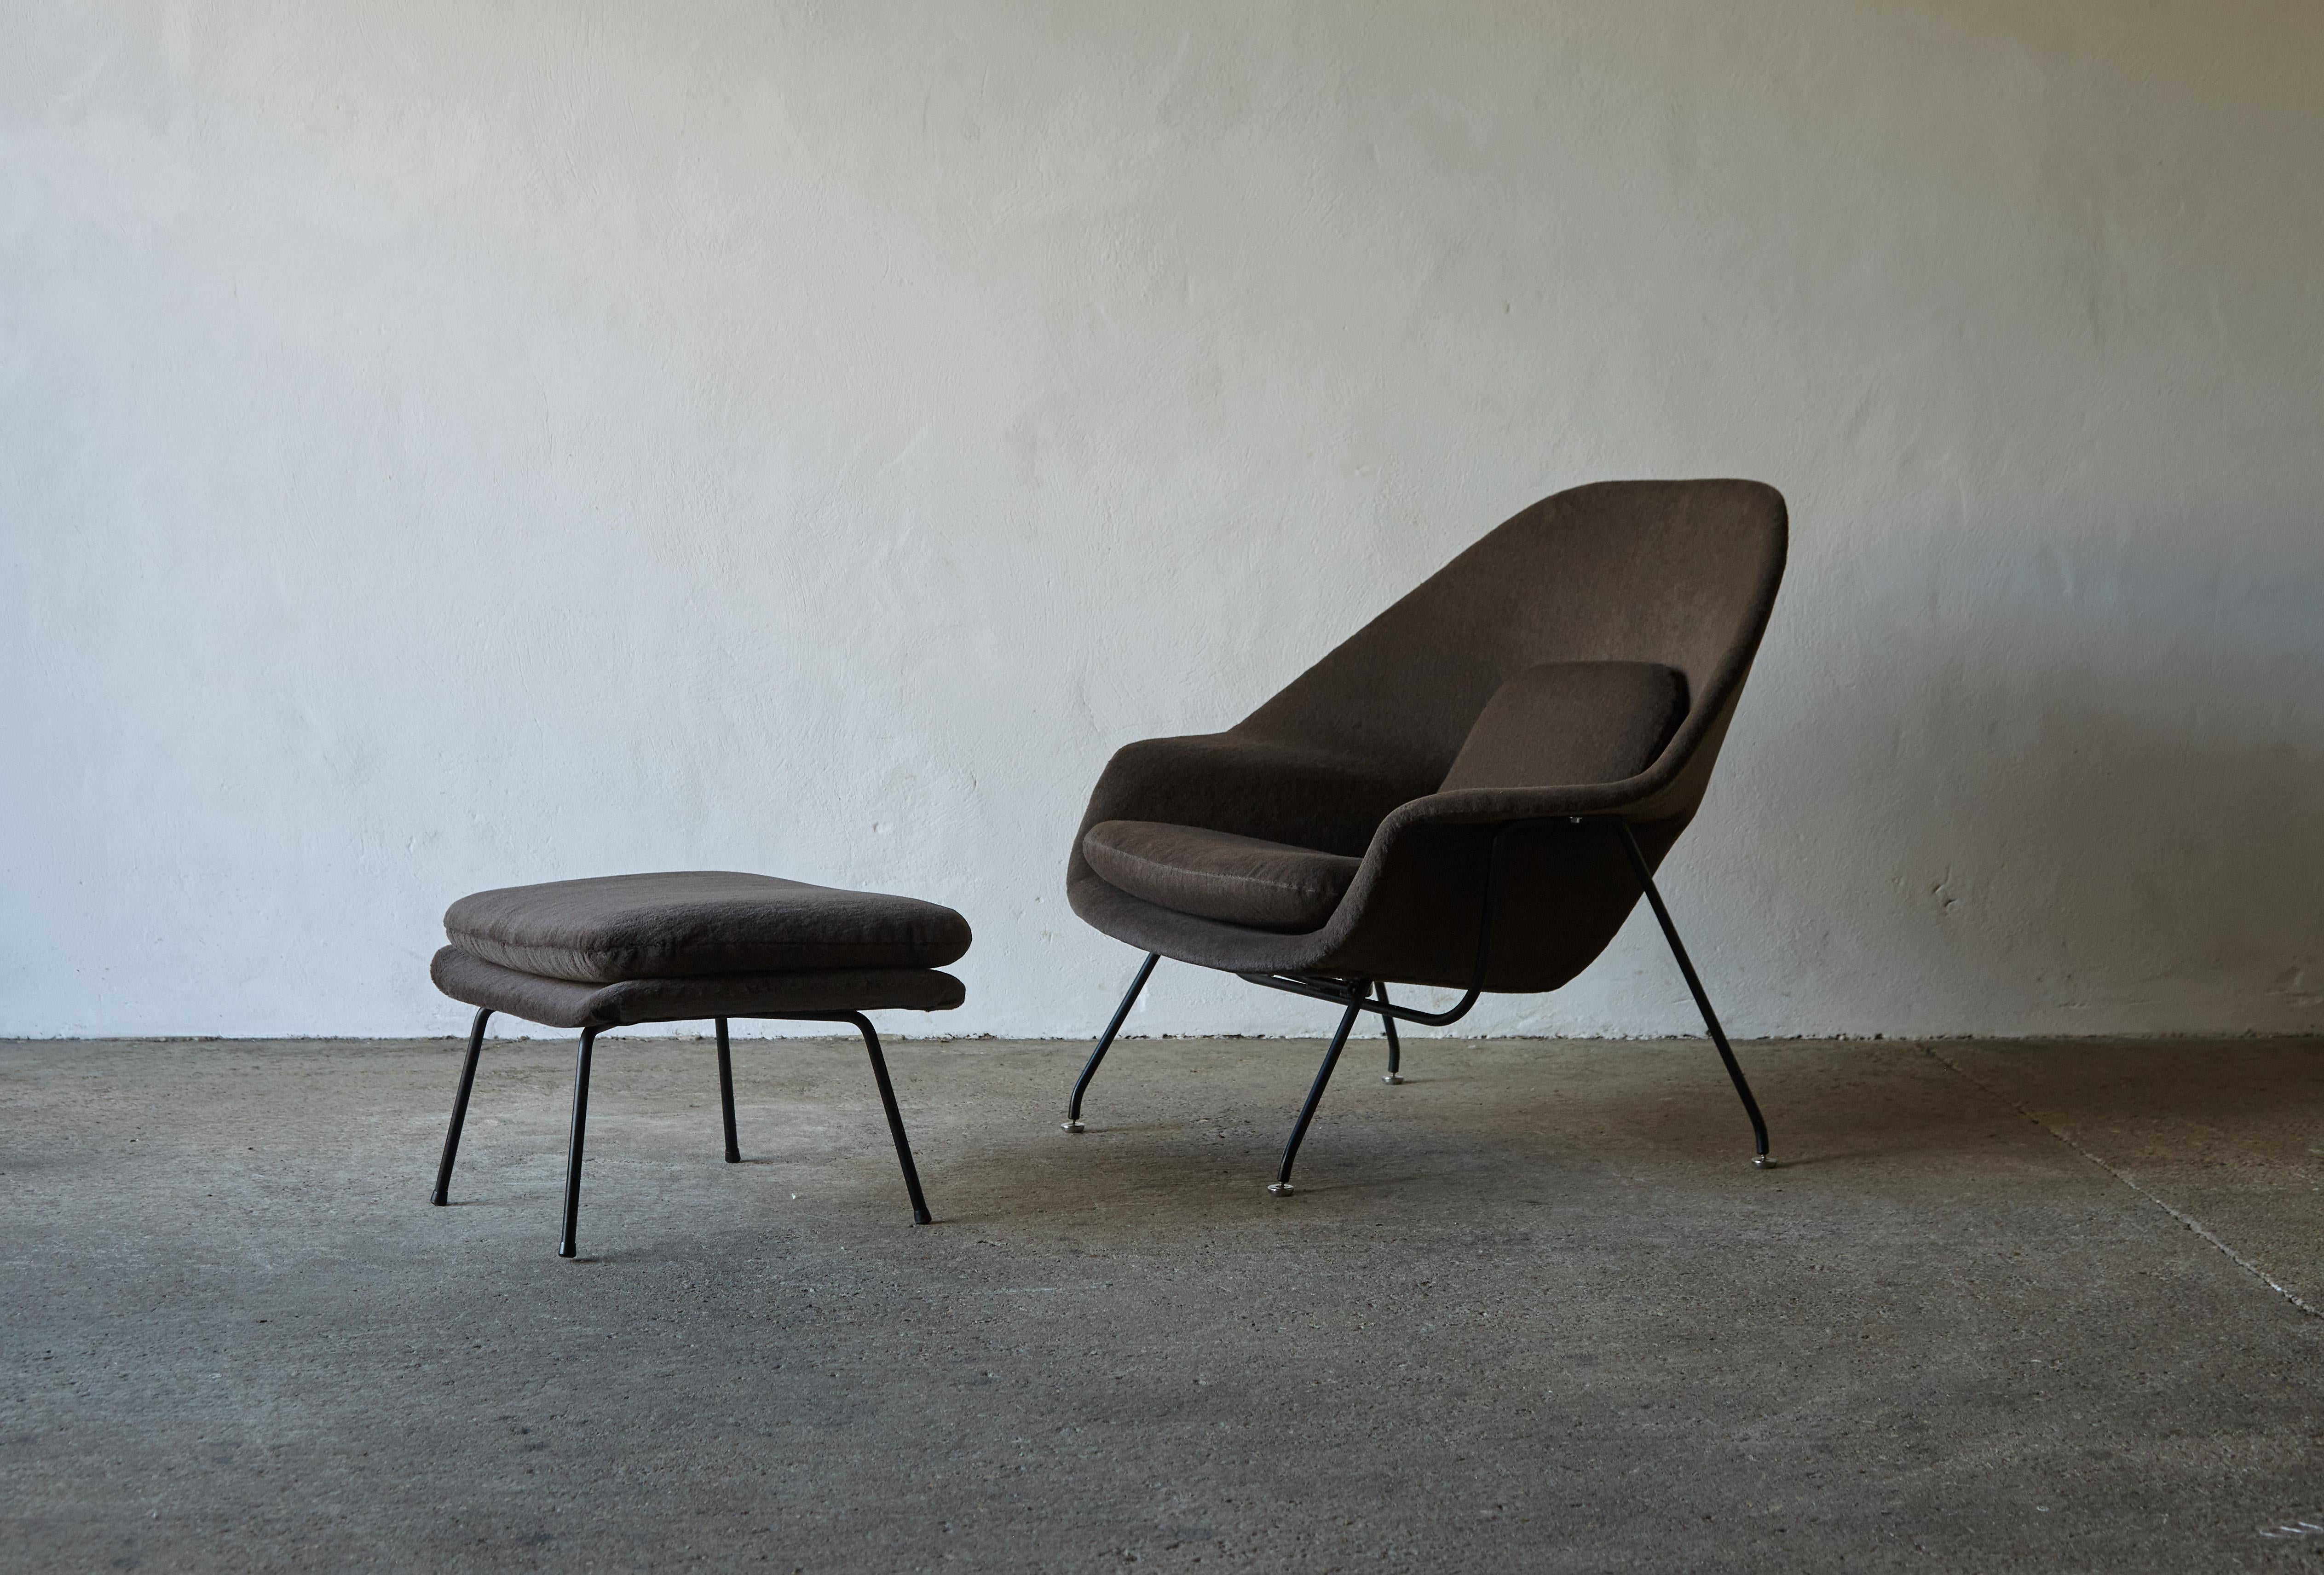 An early production Eero Saarinen womb chair and ottoman, made by Knoll, USA, 1950s. Newly upholstered in luxurious pure Alpaca fabric (brown / grey) with a structure of fibreglass, black enameled steel frames and first edition feet / glides. Fast